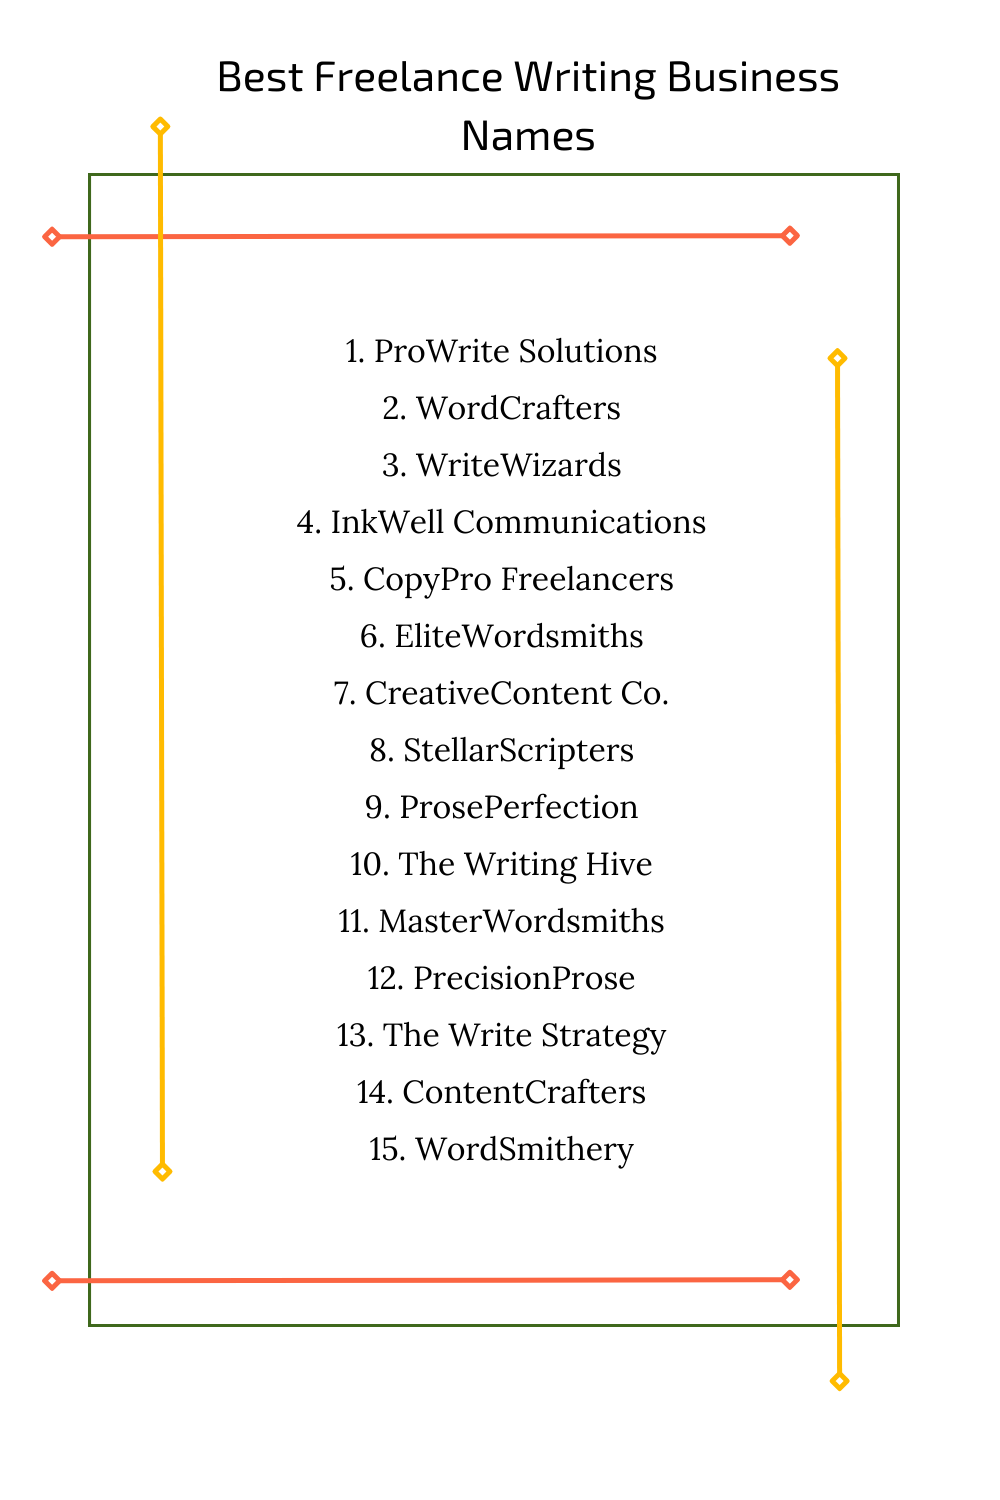 Best Freelance Writing Business Names